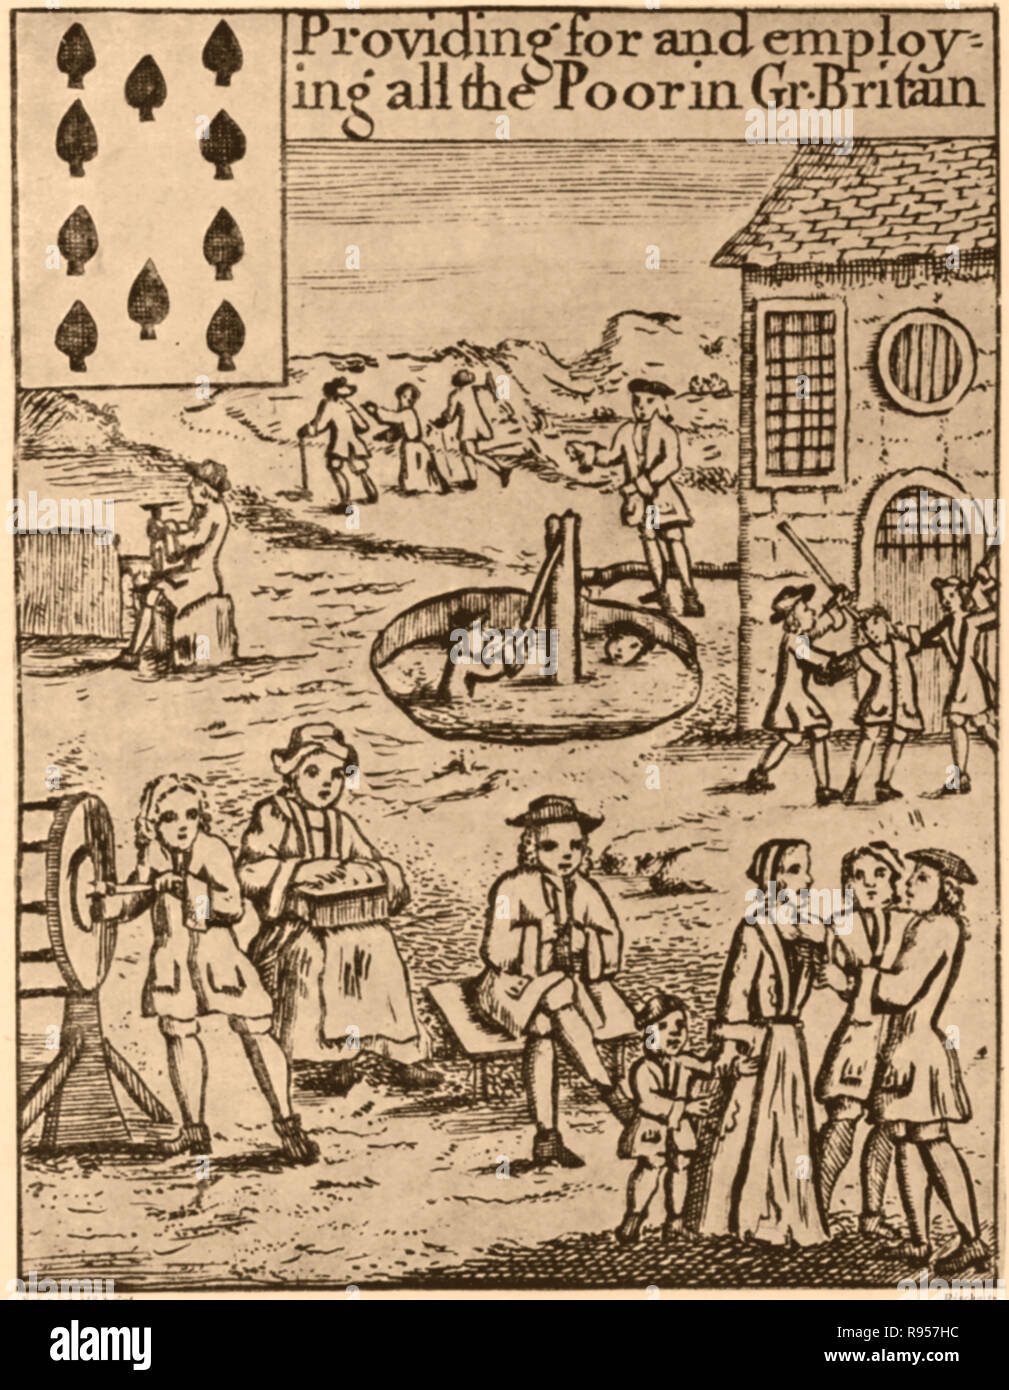 18th century playing card depicting A UK parochial workhouse (aka a Spike) scene in 1720, Workhouses at that time cared for the disabled,unemployed, orphans, long term sick,aged,poor and others requiring social care. Stock Photo